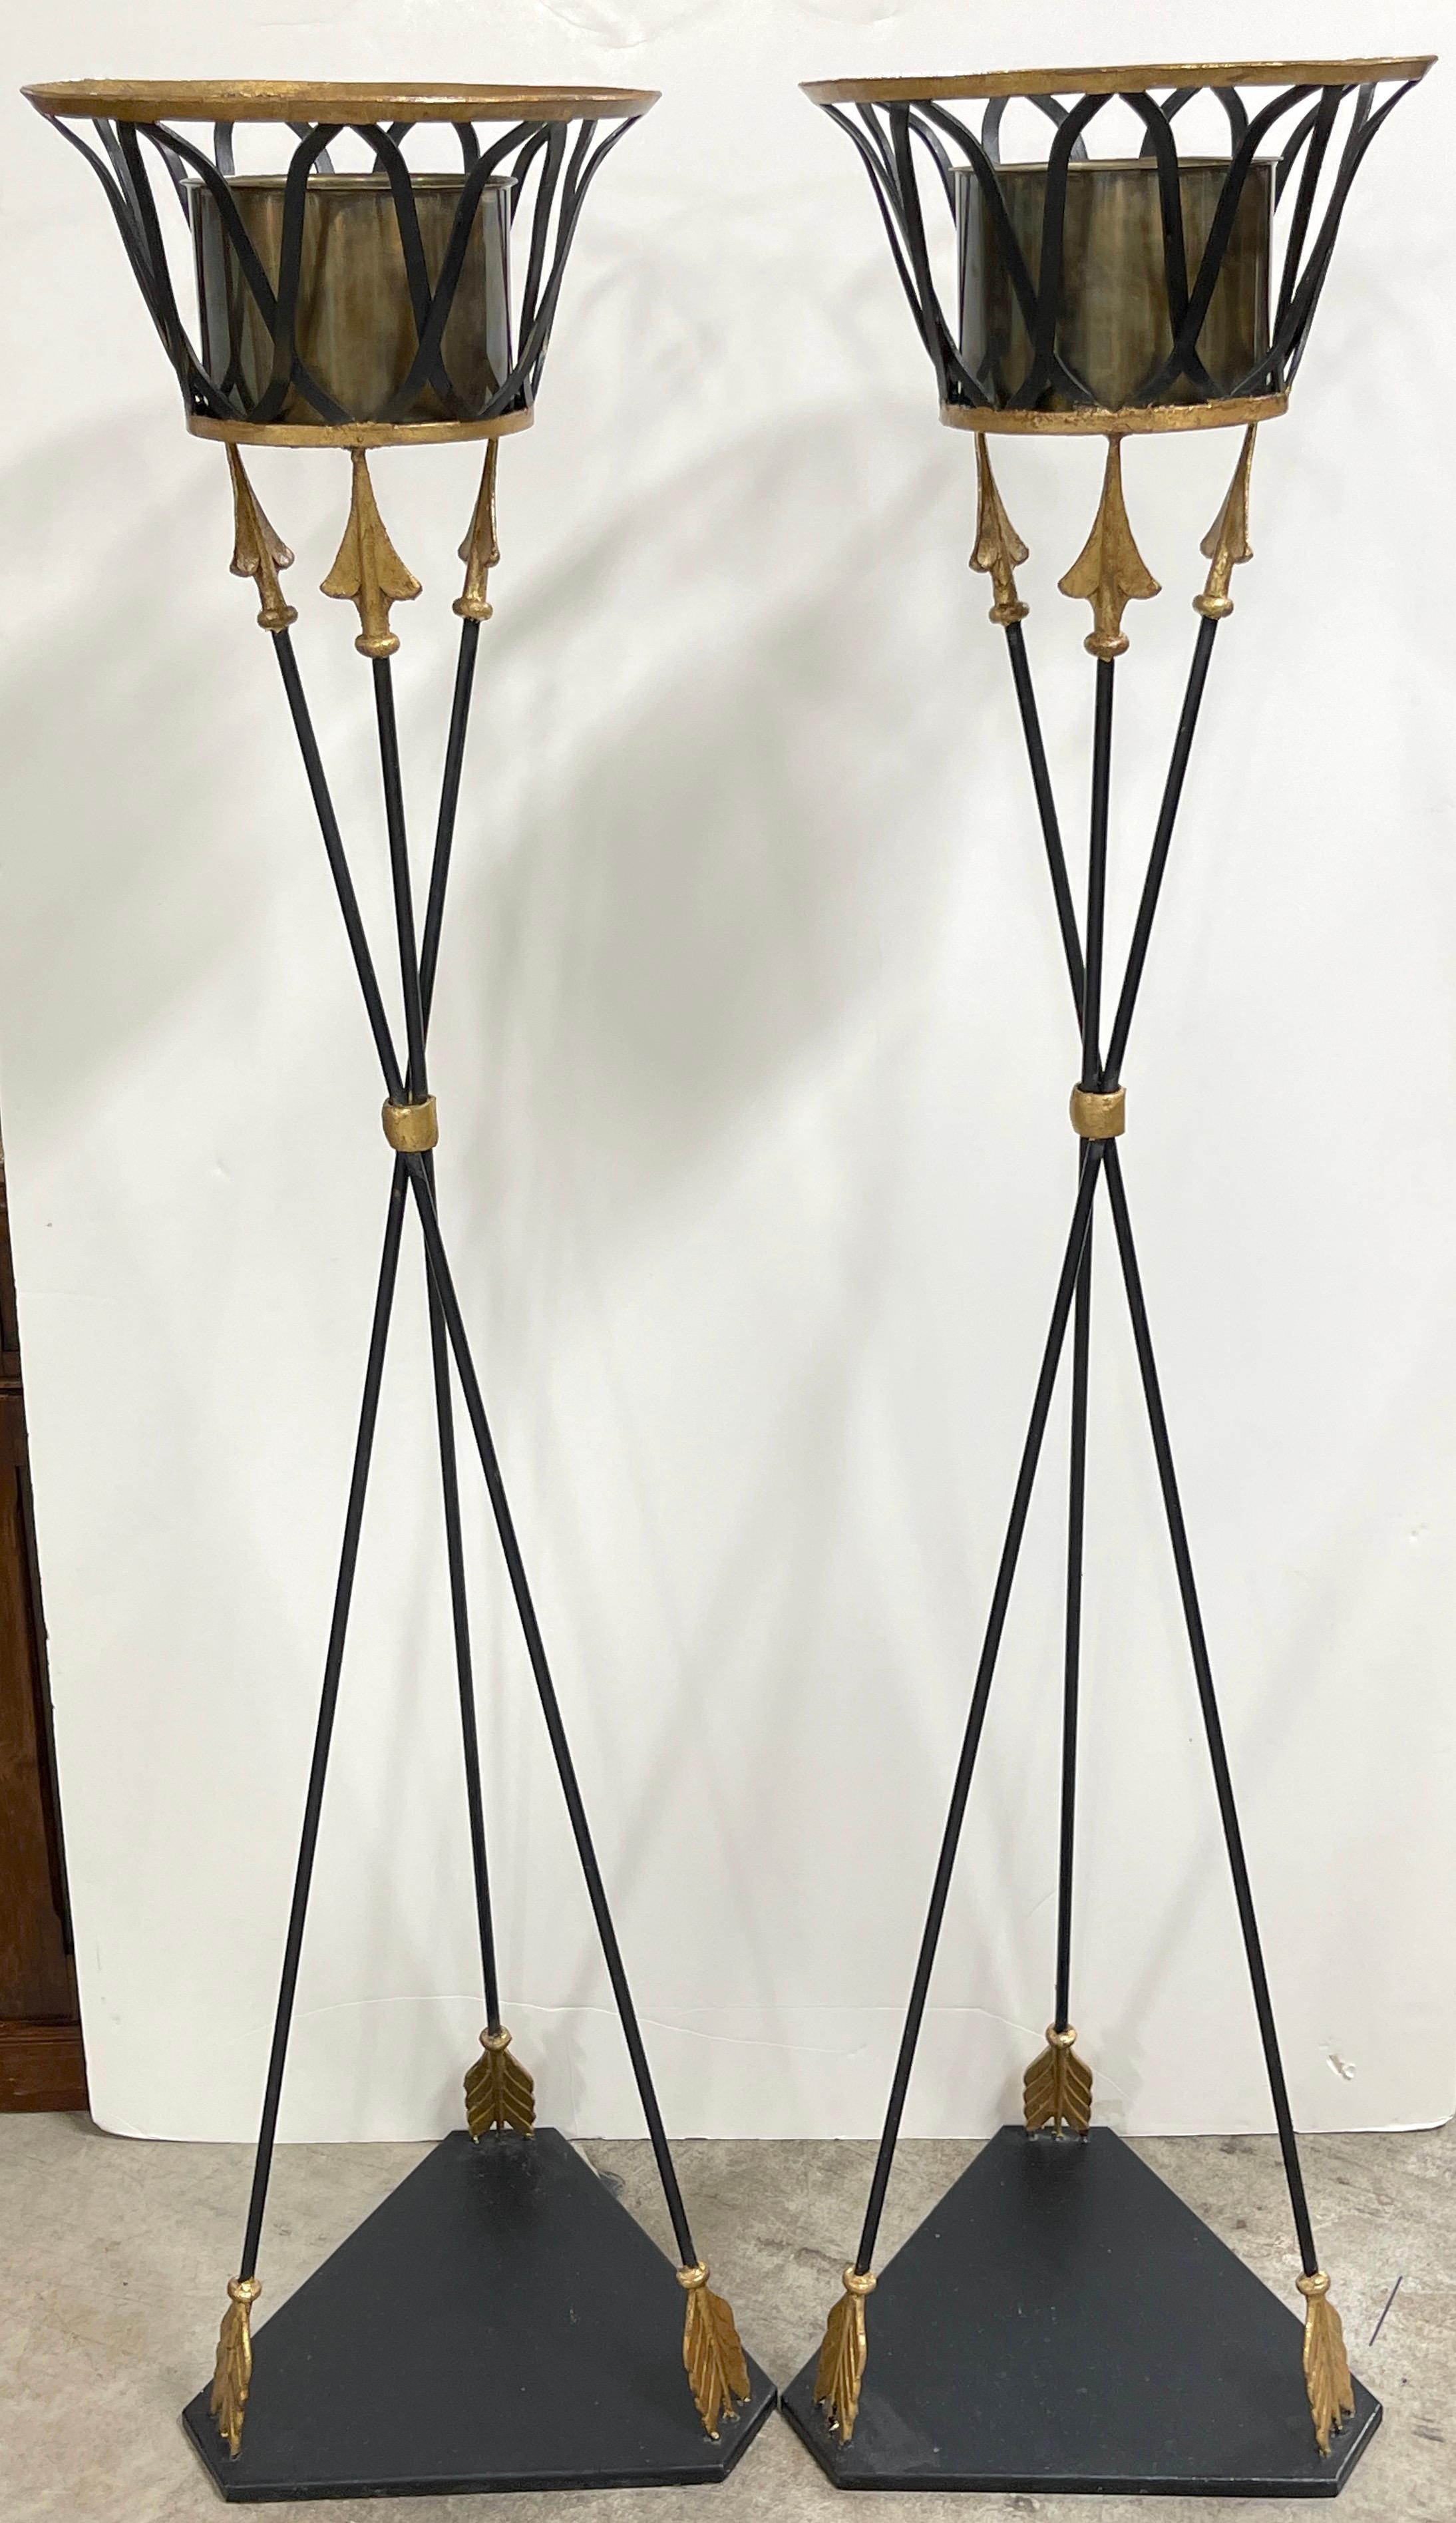 Blackened Pair of French Gilt Tole Neoclassical Torchere Jardinière / Plant Stands